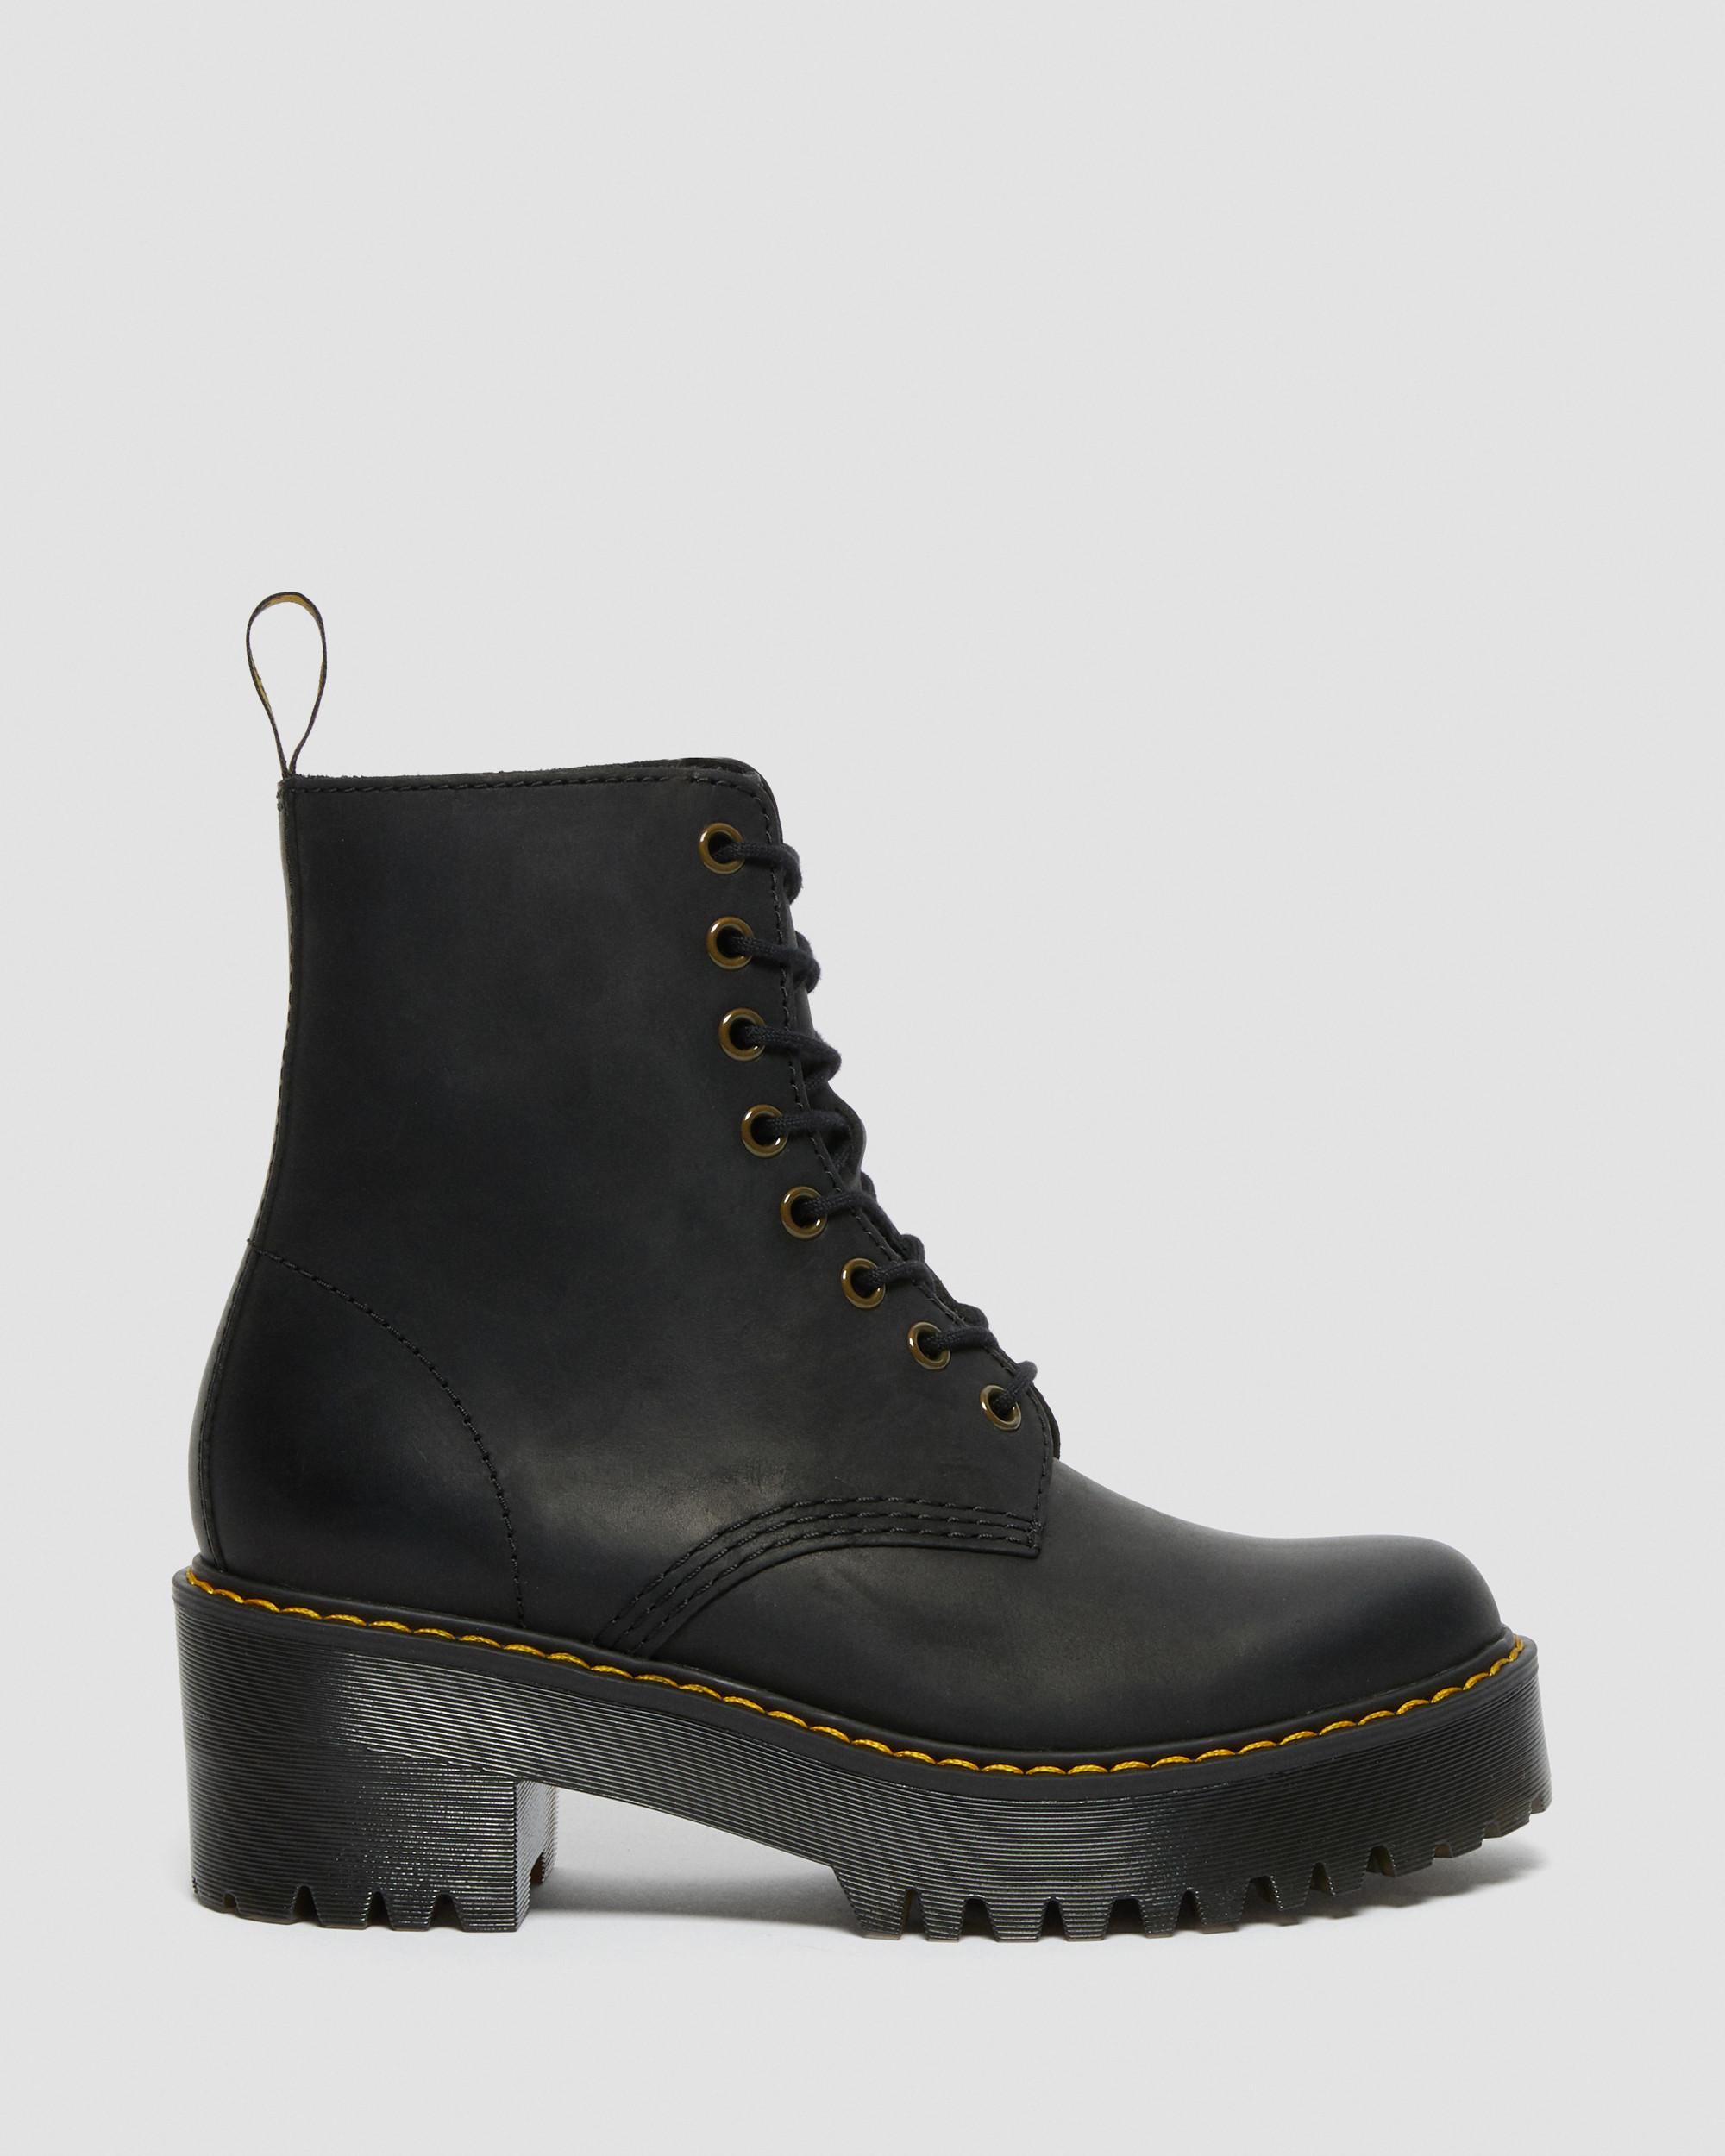 Shriver Hi Women's Wyoming Leather Heeled Boots | Dr. Martens